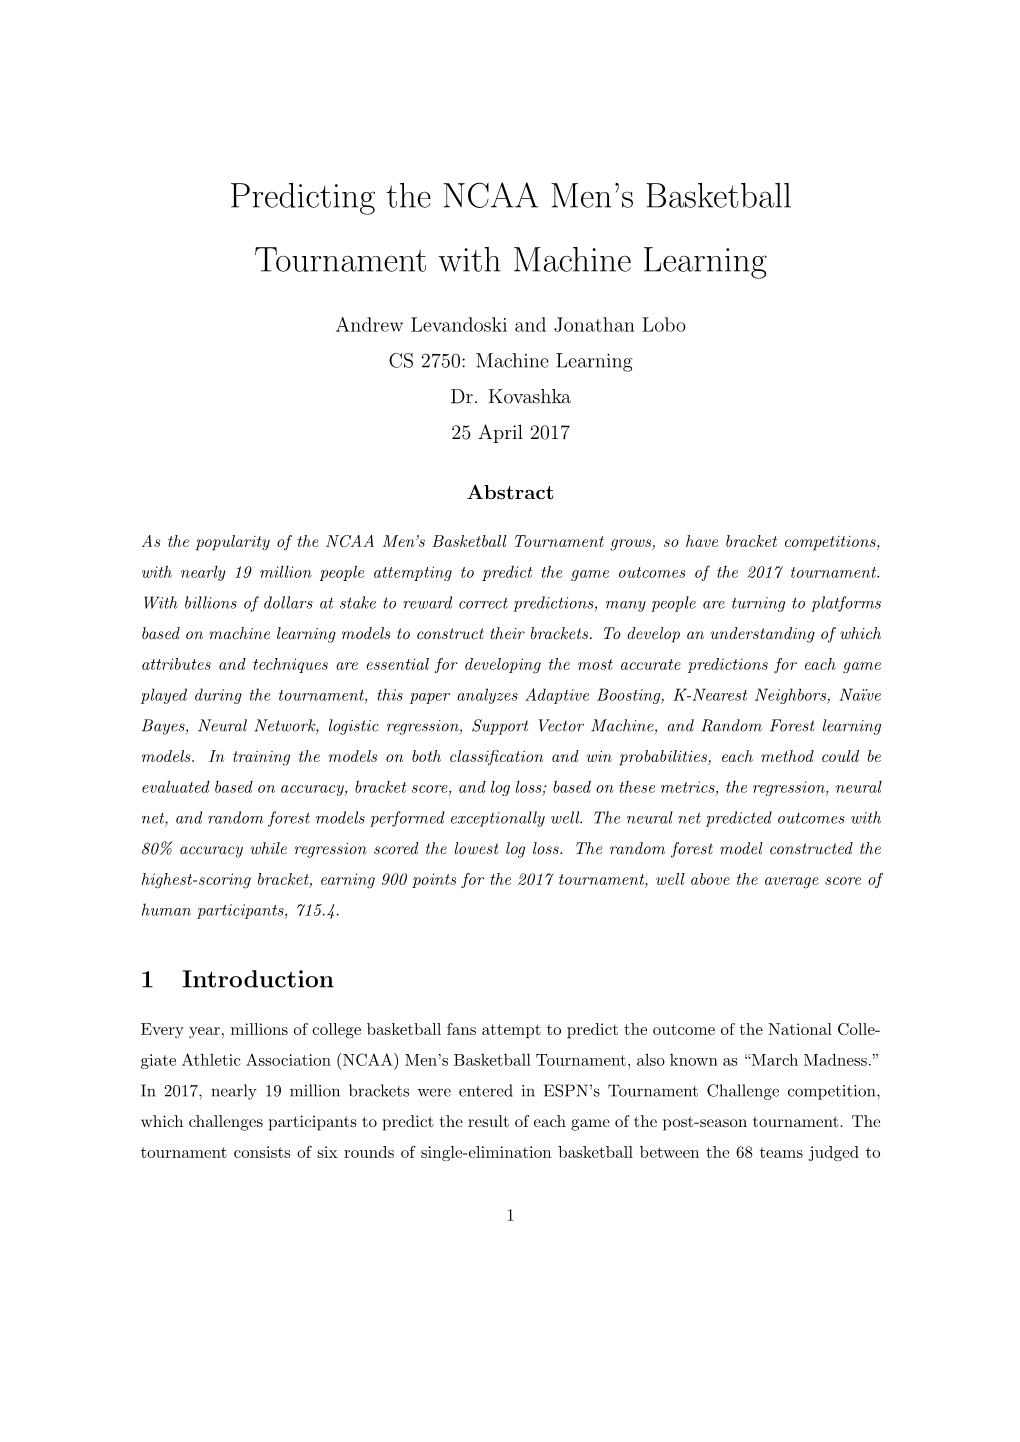 Predicting the NCAA Men's Basketball Tournament with Machine Learning